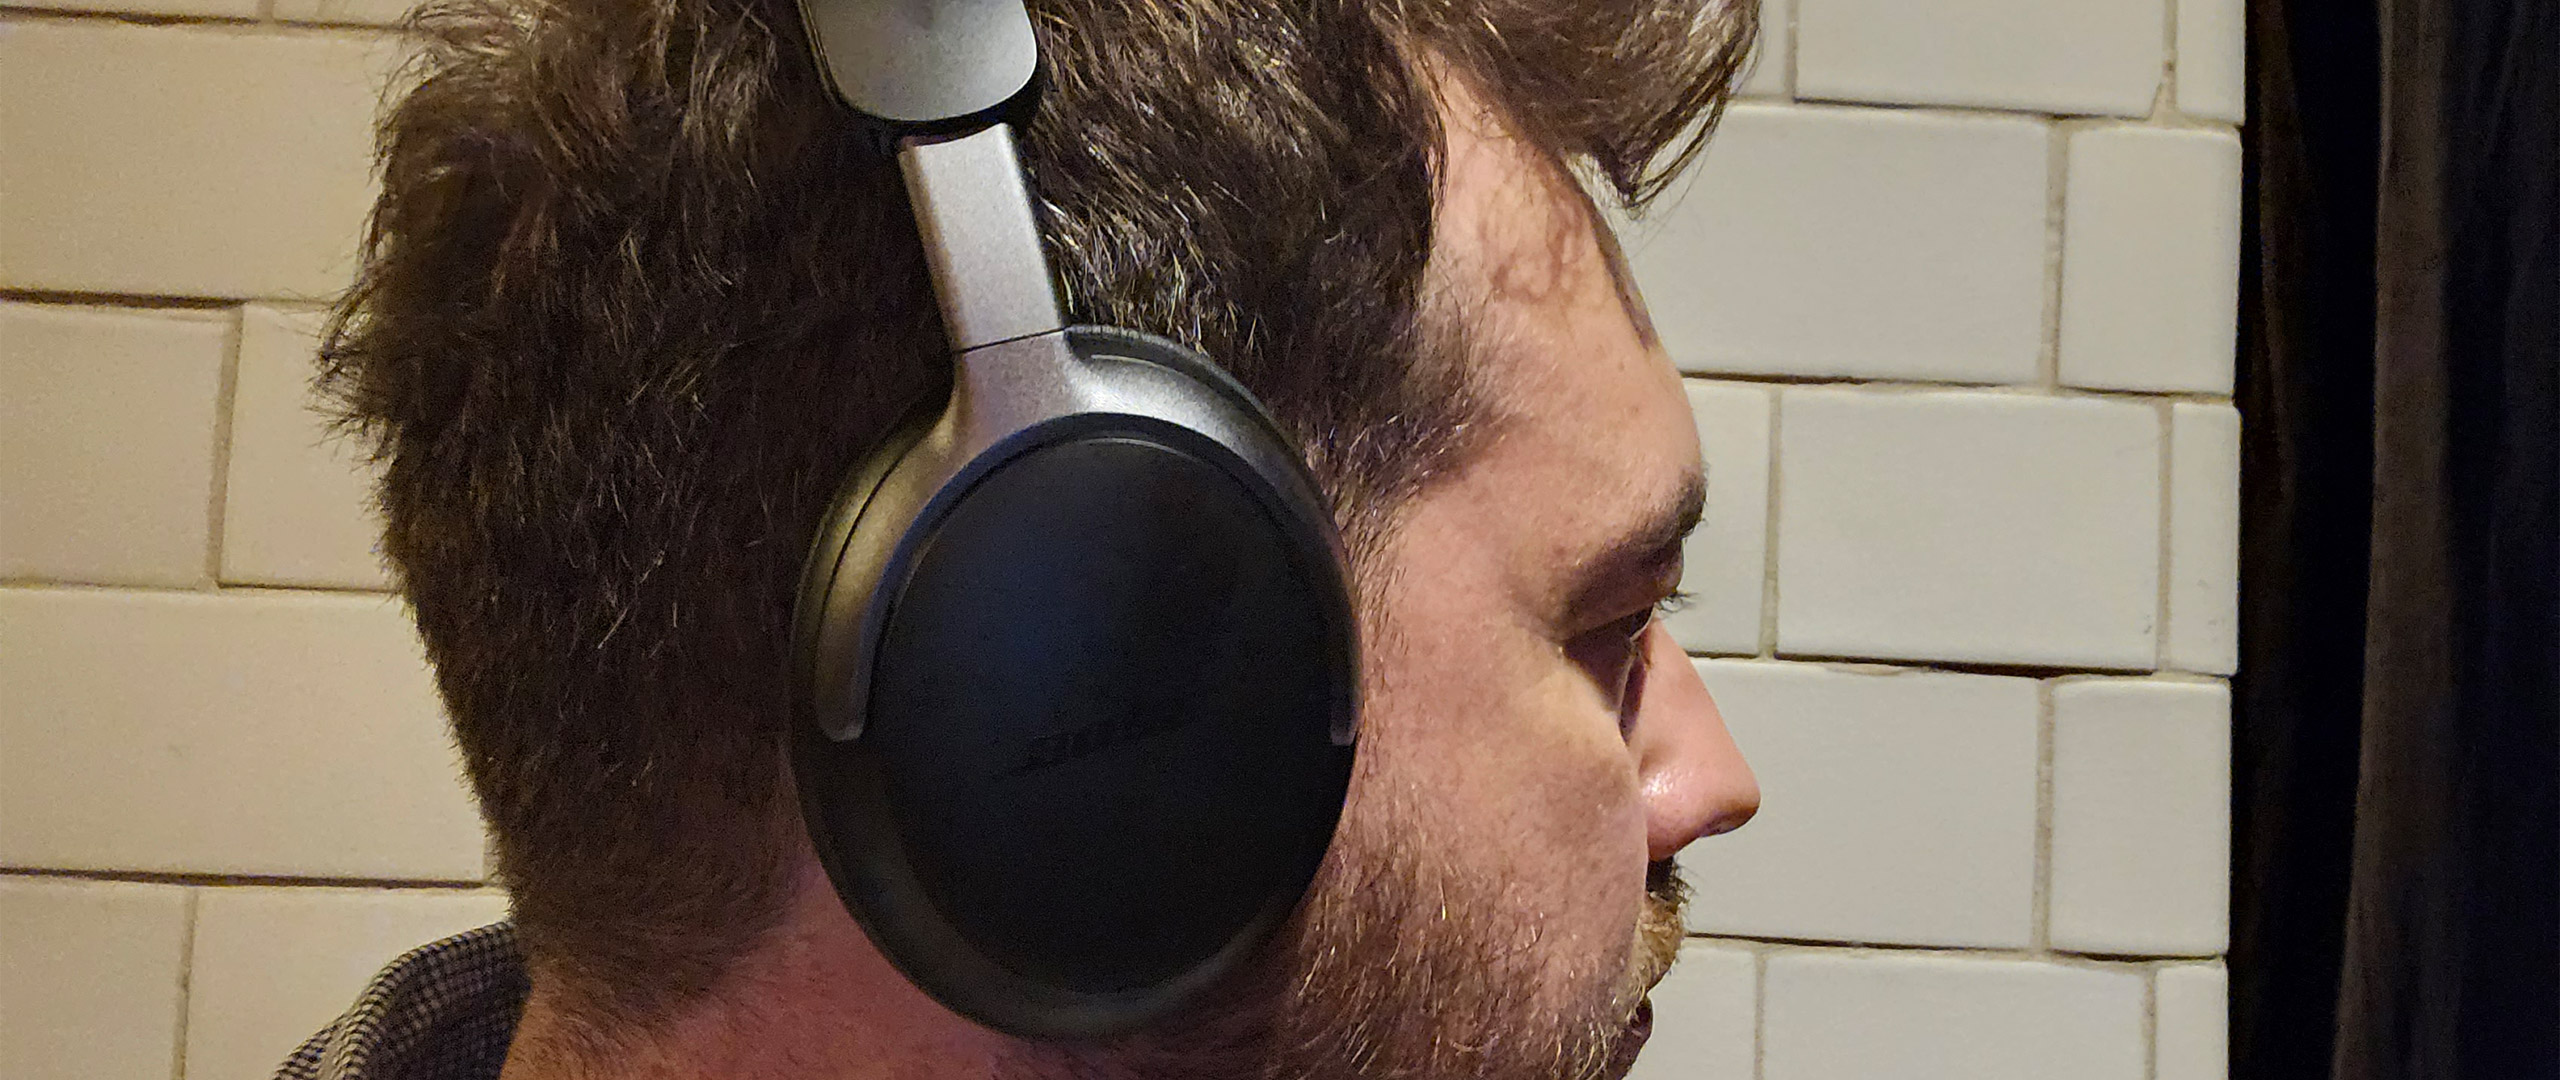 Bose showed me the QuietComfort Headphones Ultra and the ANC blew